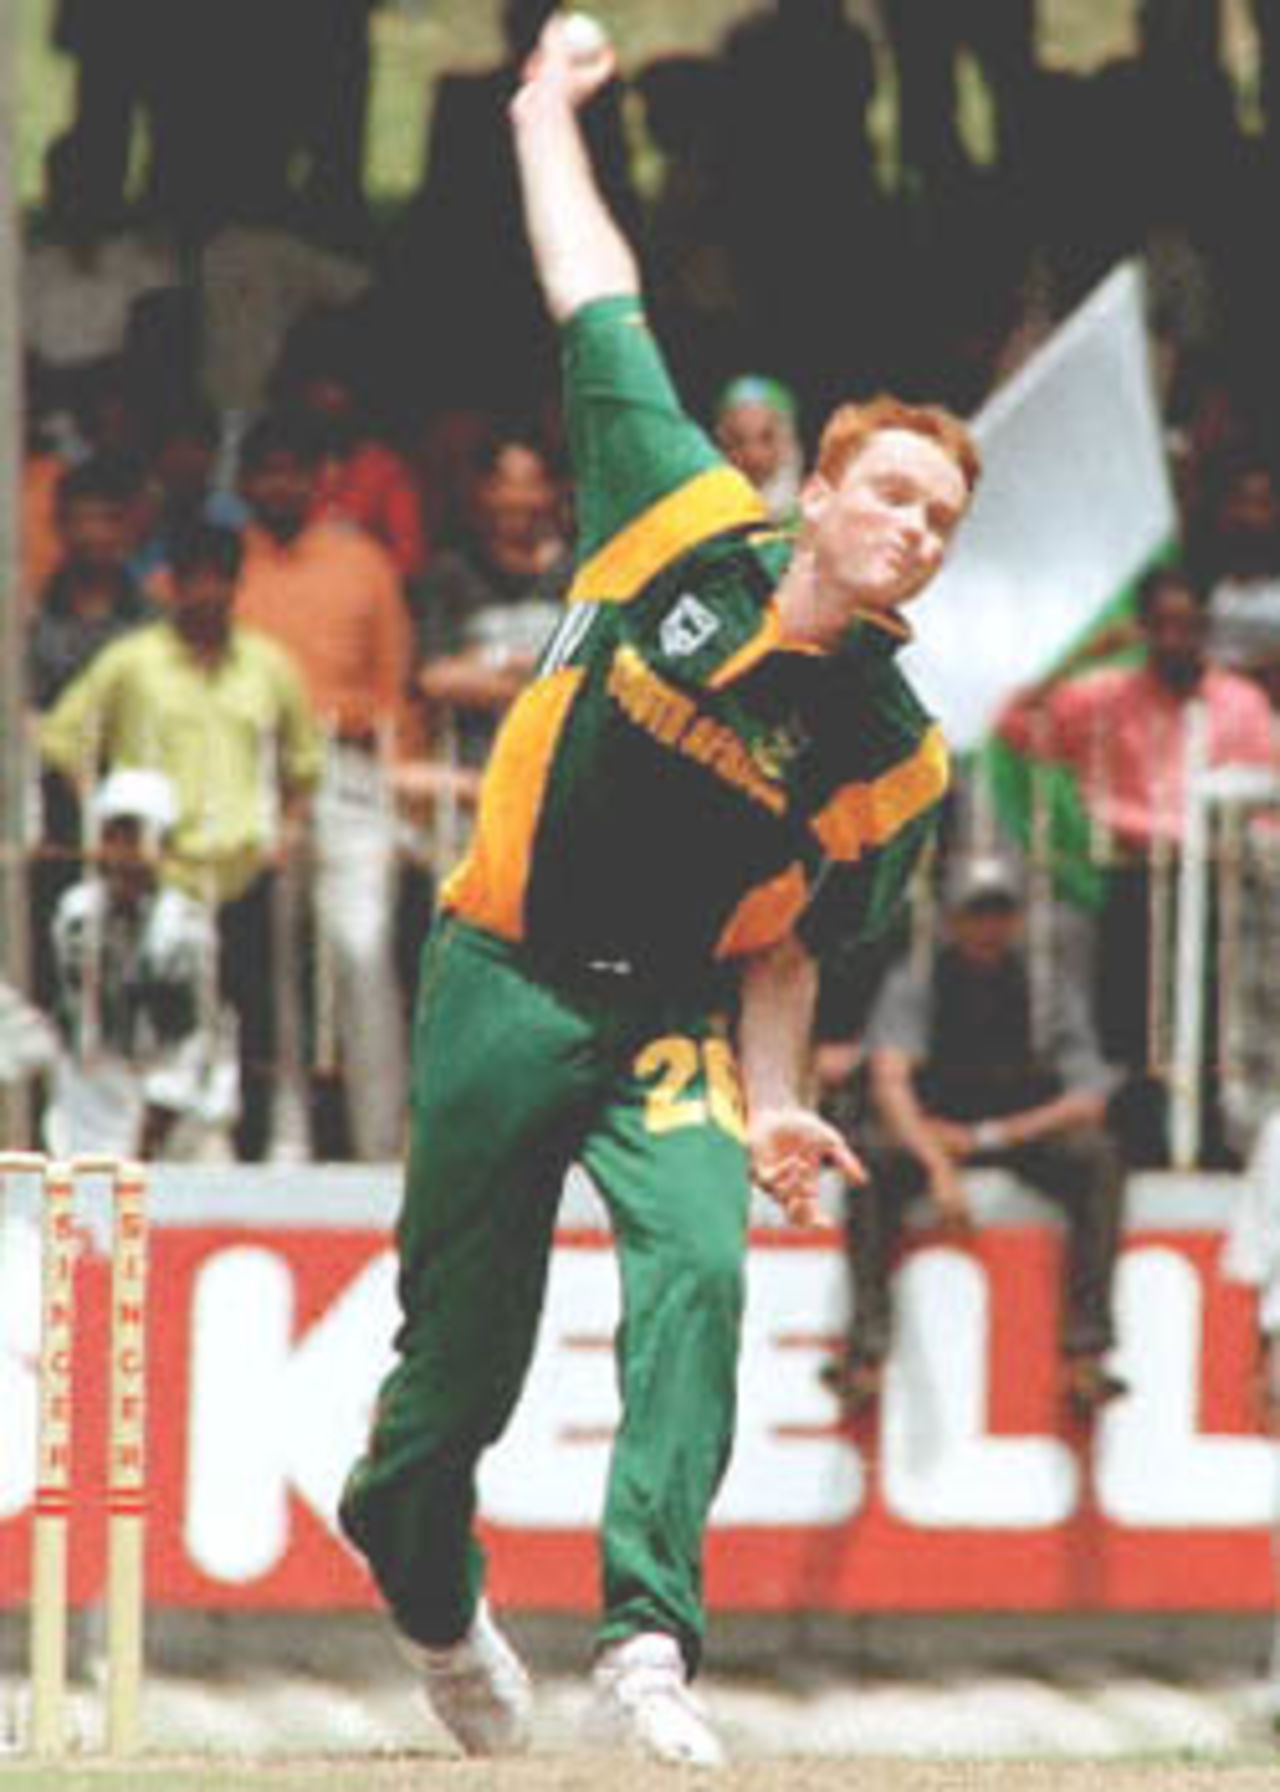 South African bowler David Terbrugge bowls against Pakistan in the Singer Triangular series in the Sri Lankan capital Colombo. Terbrugge took four wickets for 20 giving South Africa a seven-wicket victory to take them to the finals with Sri Lanka. Singer Triangular Series, 2000/01, 6th Match, Pakistan v South Africa, Sinhalese Sports Club Ground, Colombo, 12 July 2000.